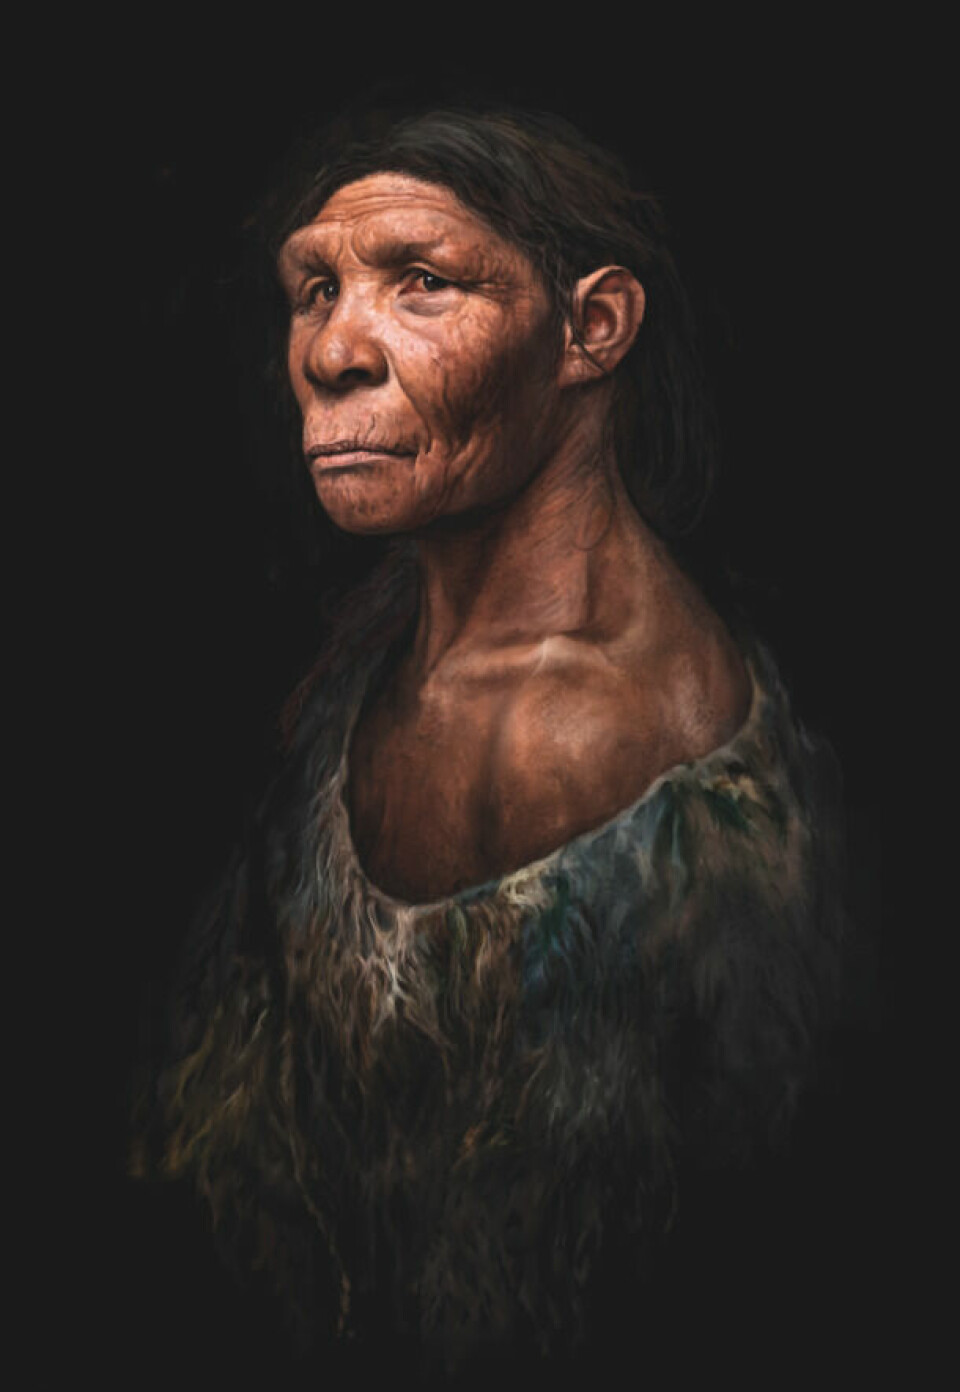 Neanderthals took care of their sick and old community members.